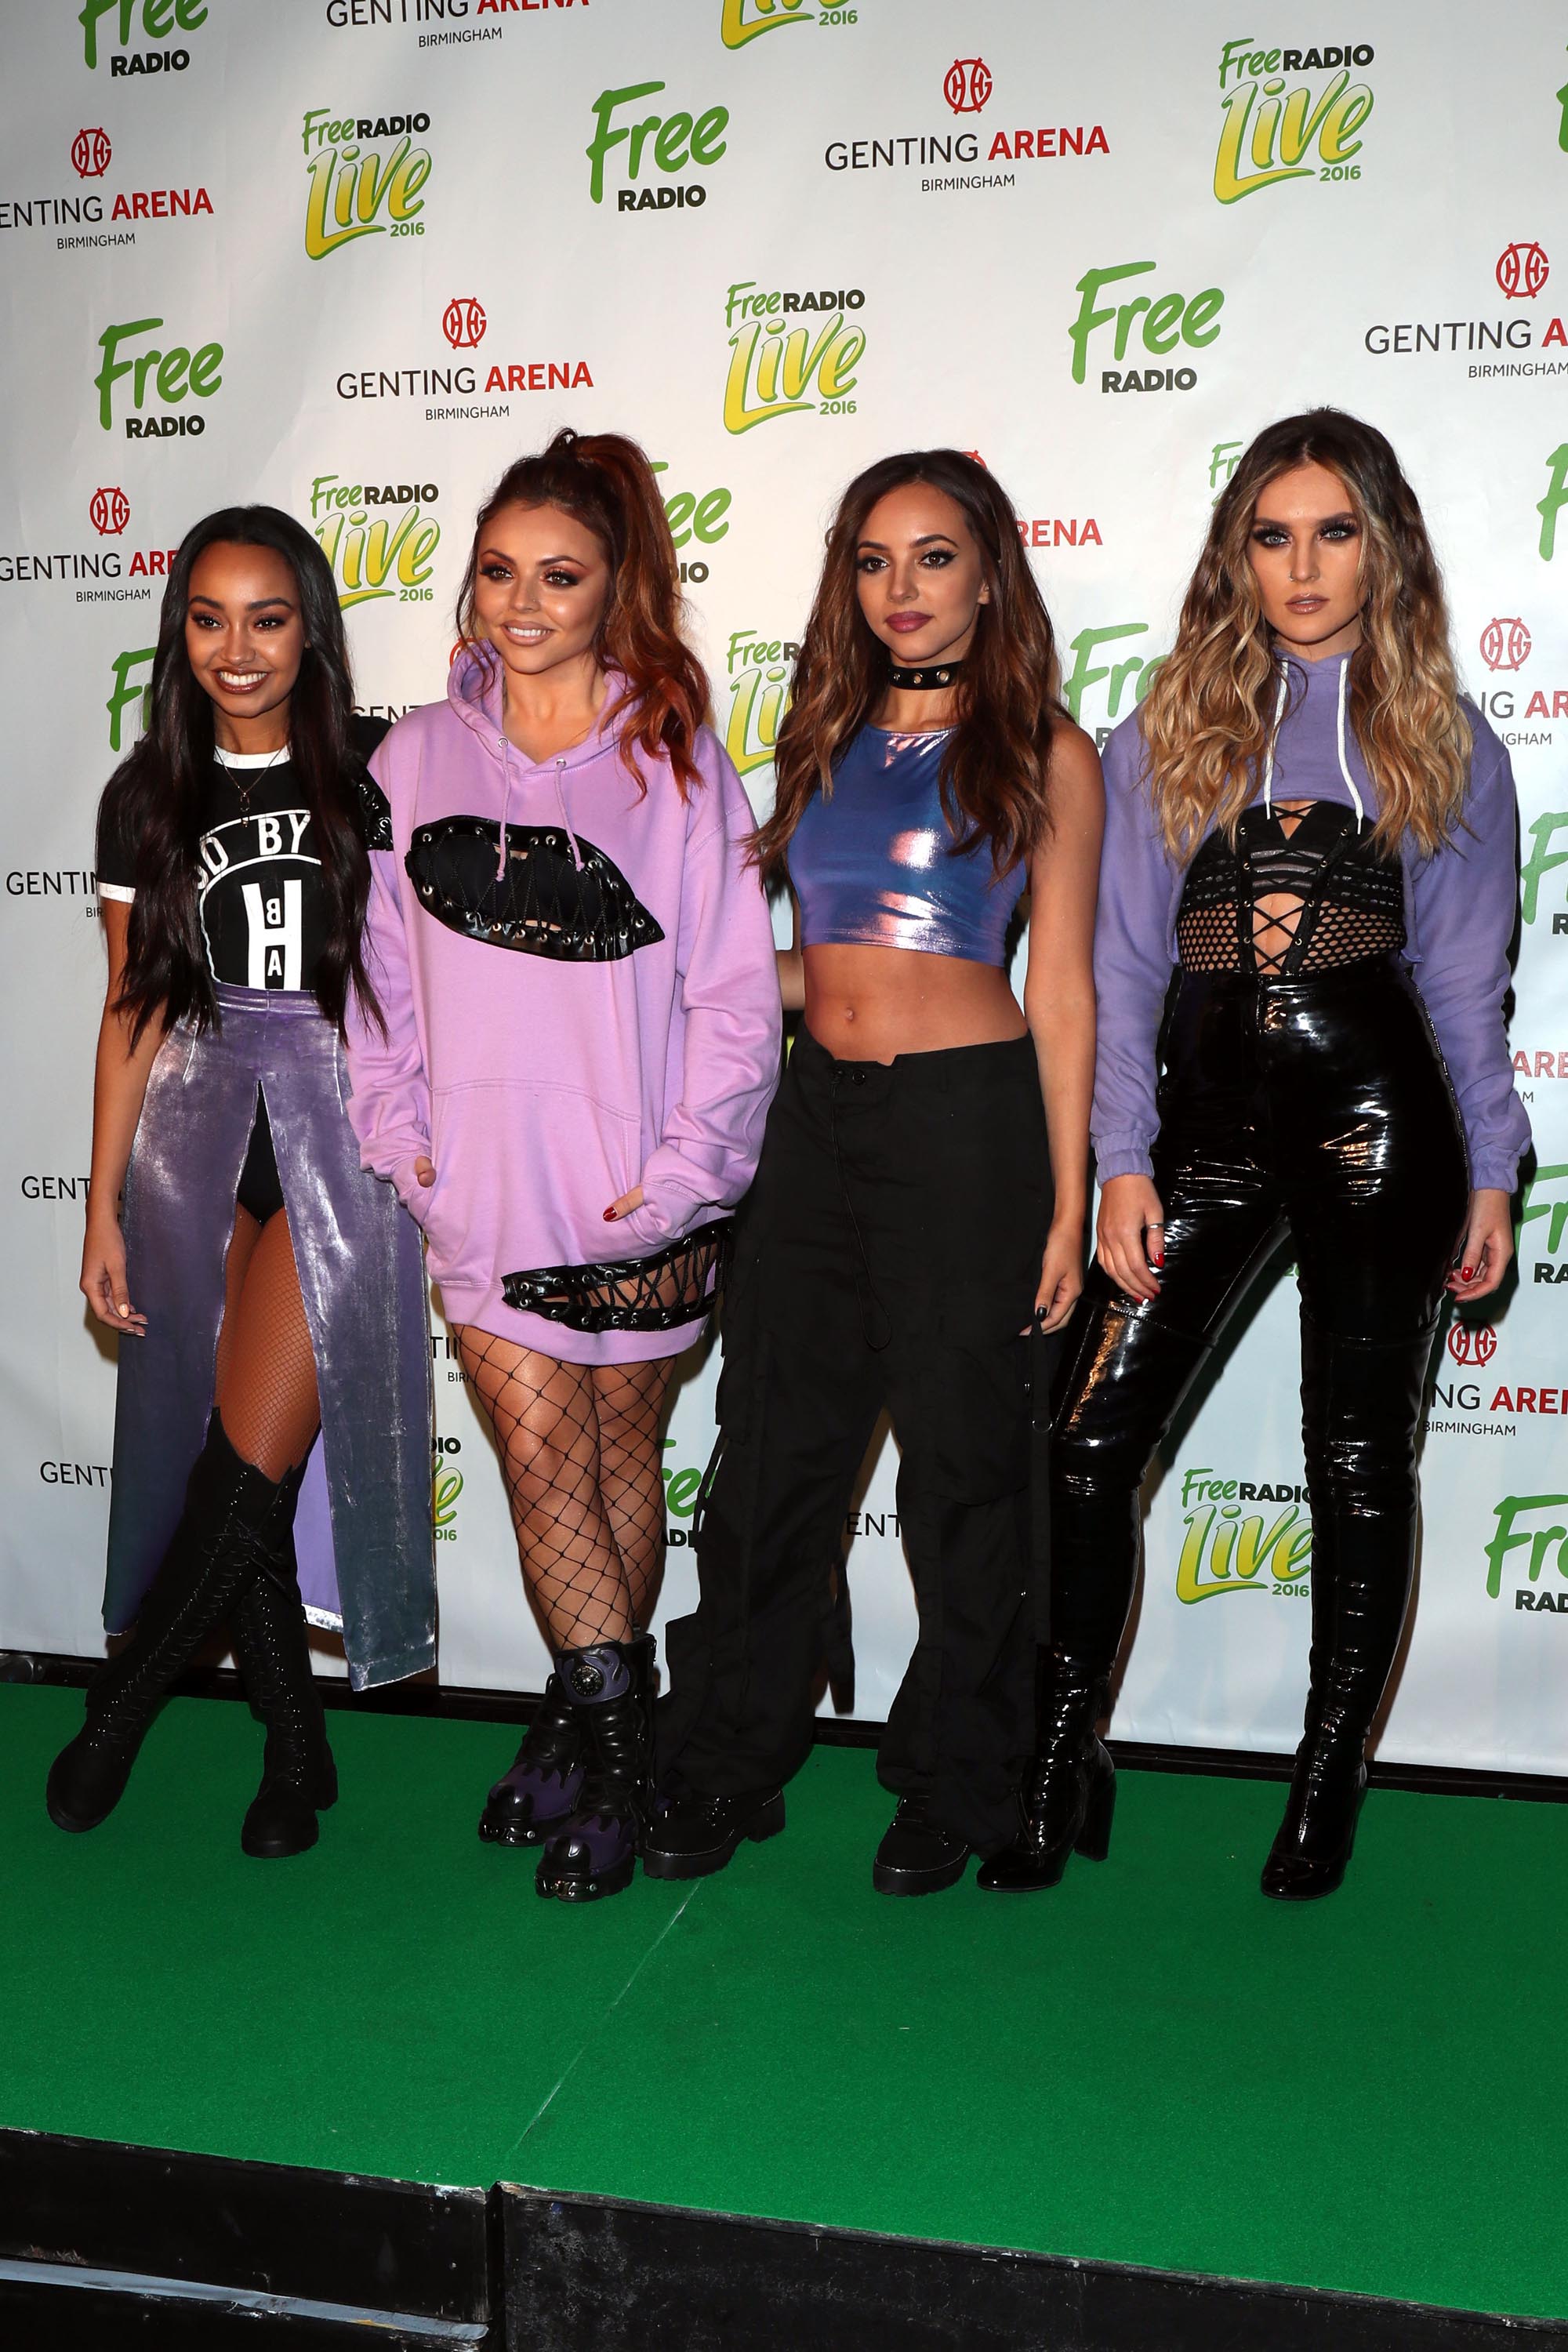 Little Mix performs at Free Radio Live